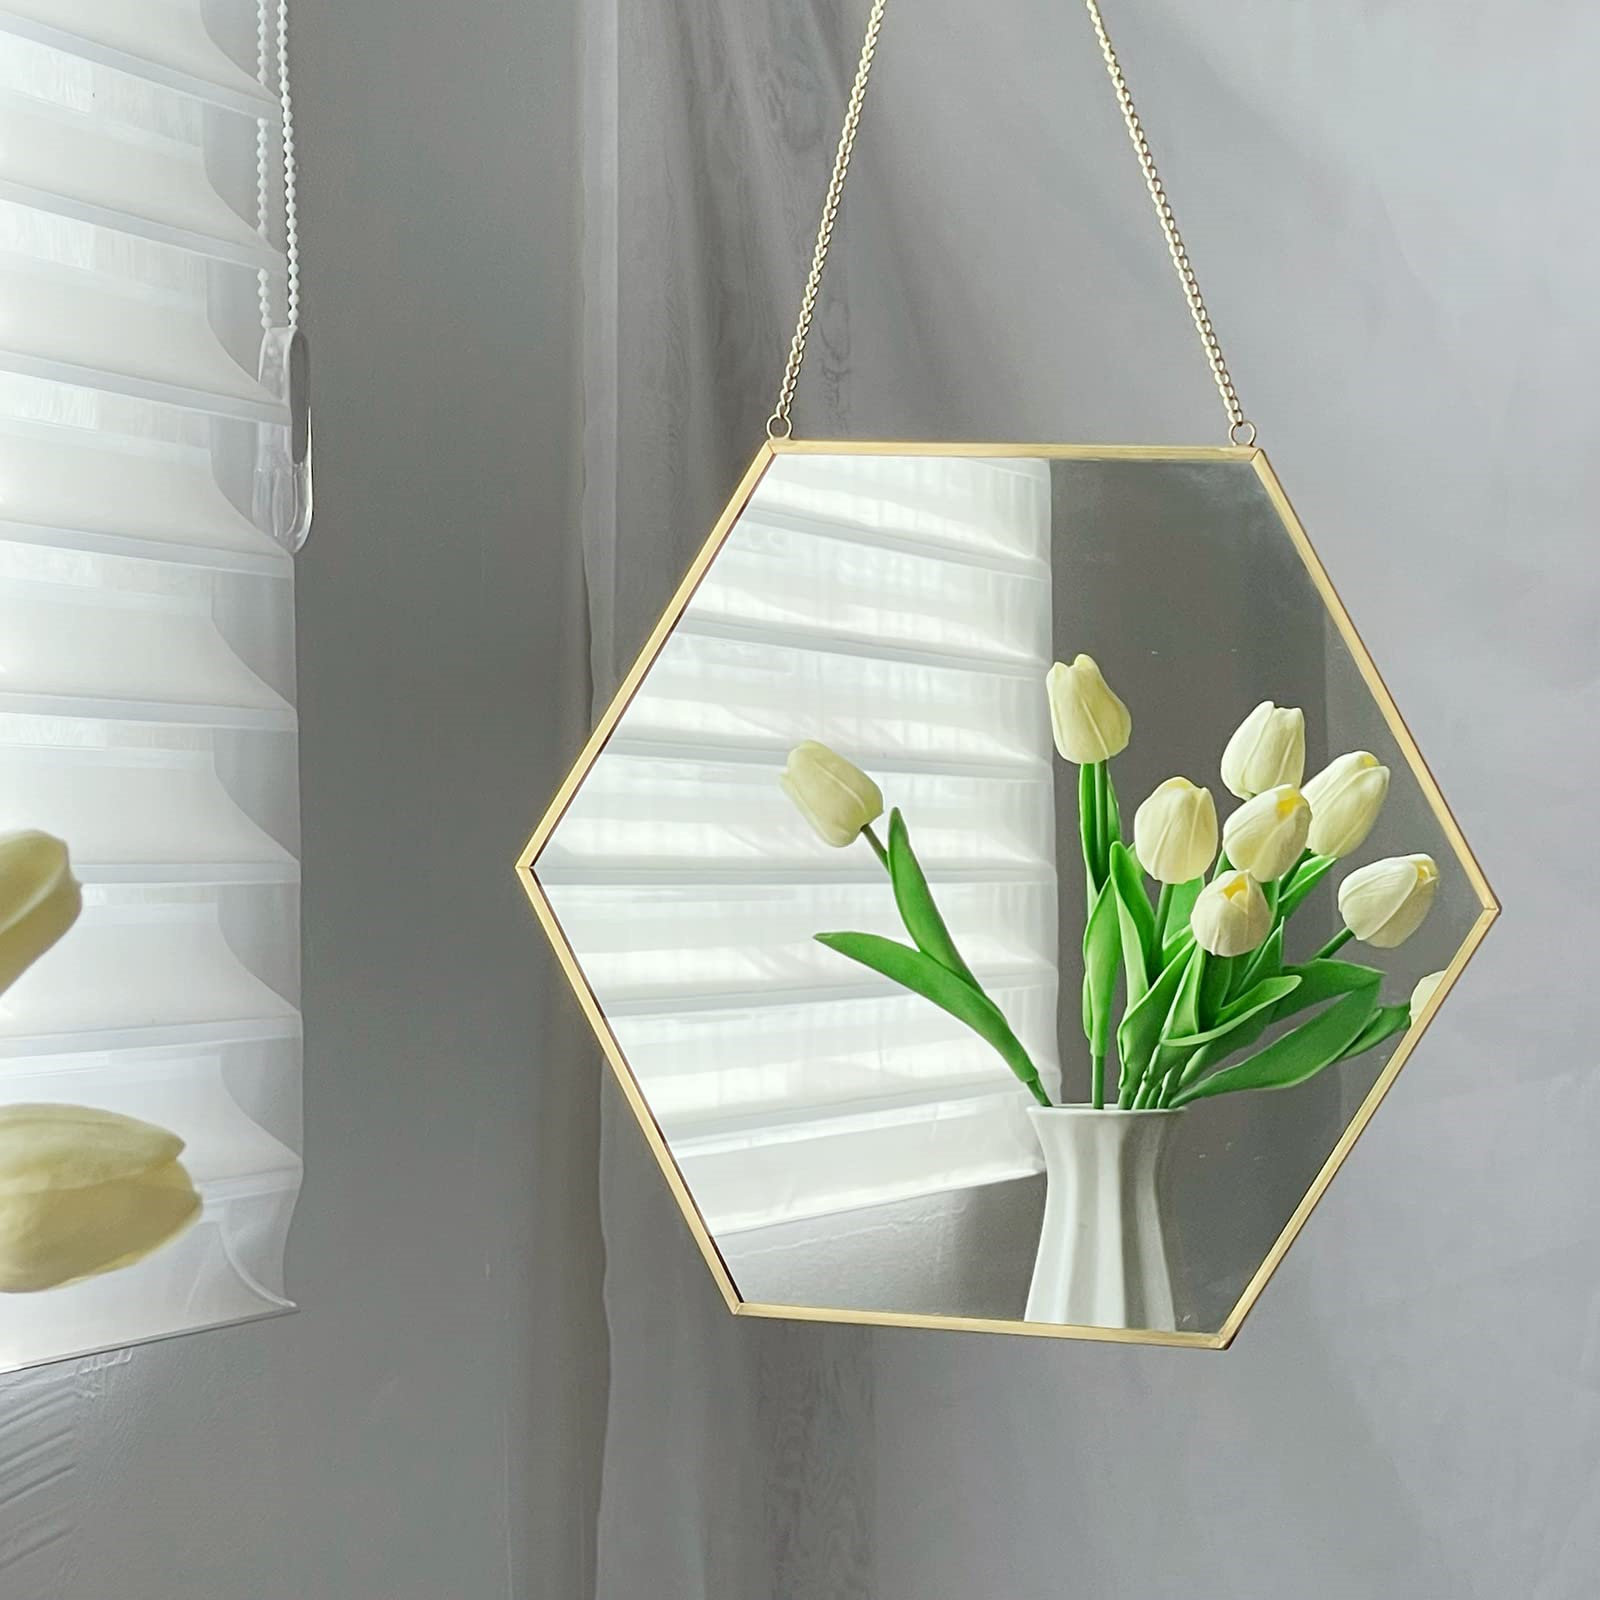 Hanging Wall Mirror Geometric Hexagon Round Small Art with Chain for Home Decor 